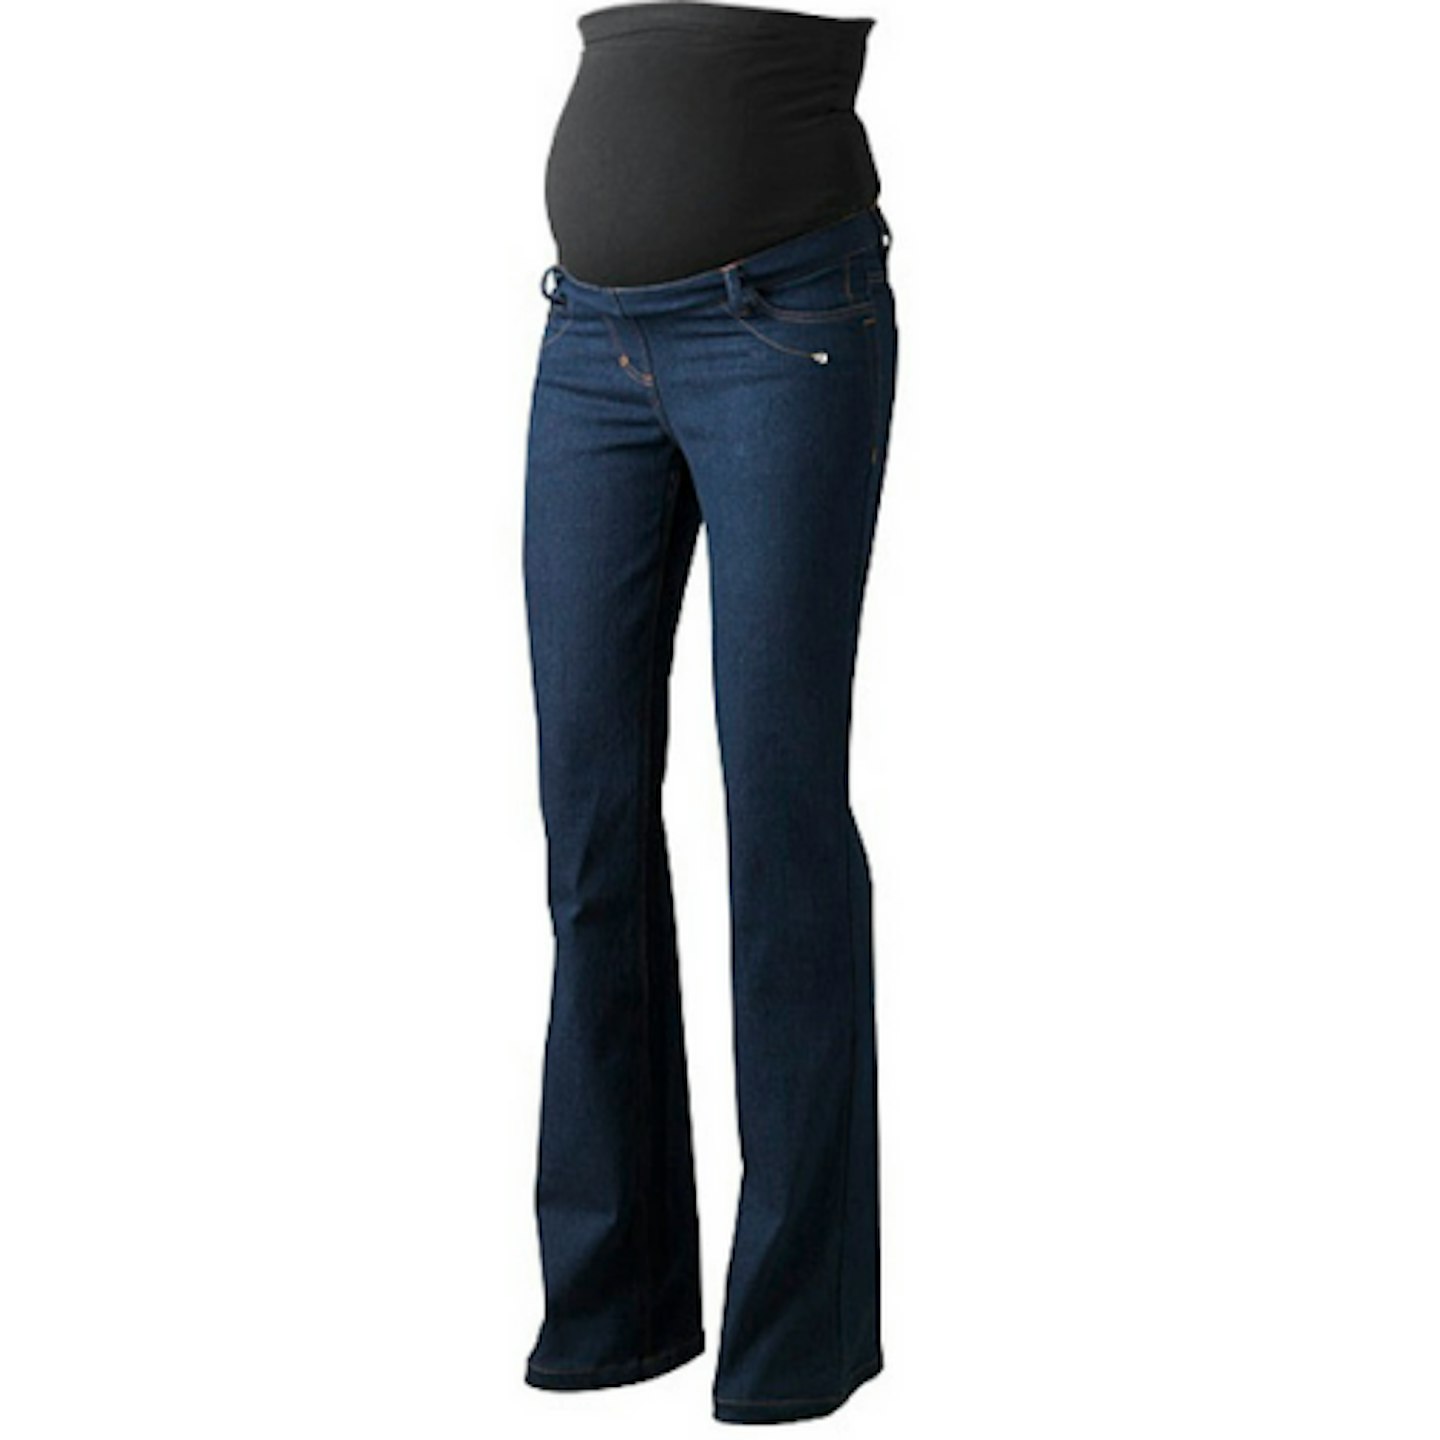 Indigo Over Bump Tall Bootcut Jeans Tall Maternity Store